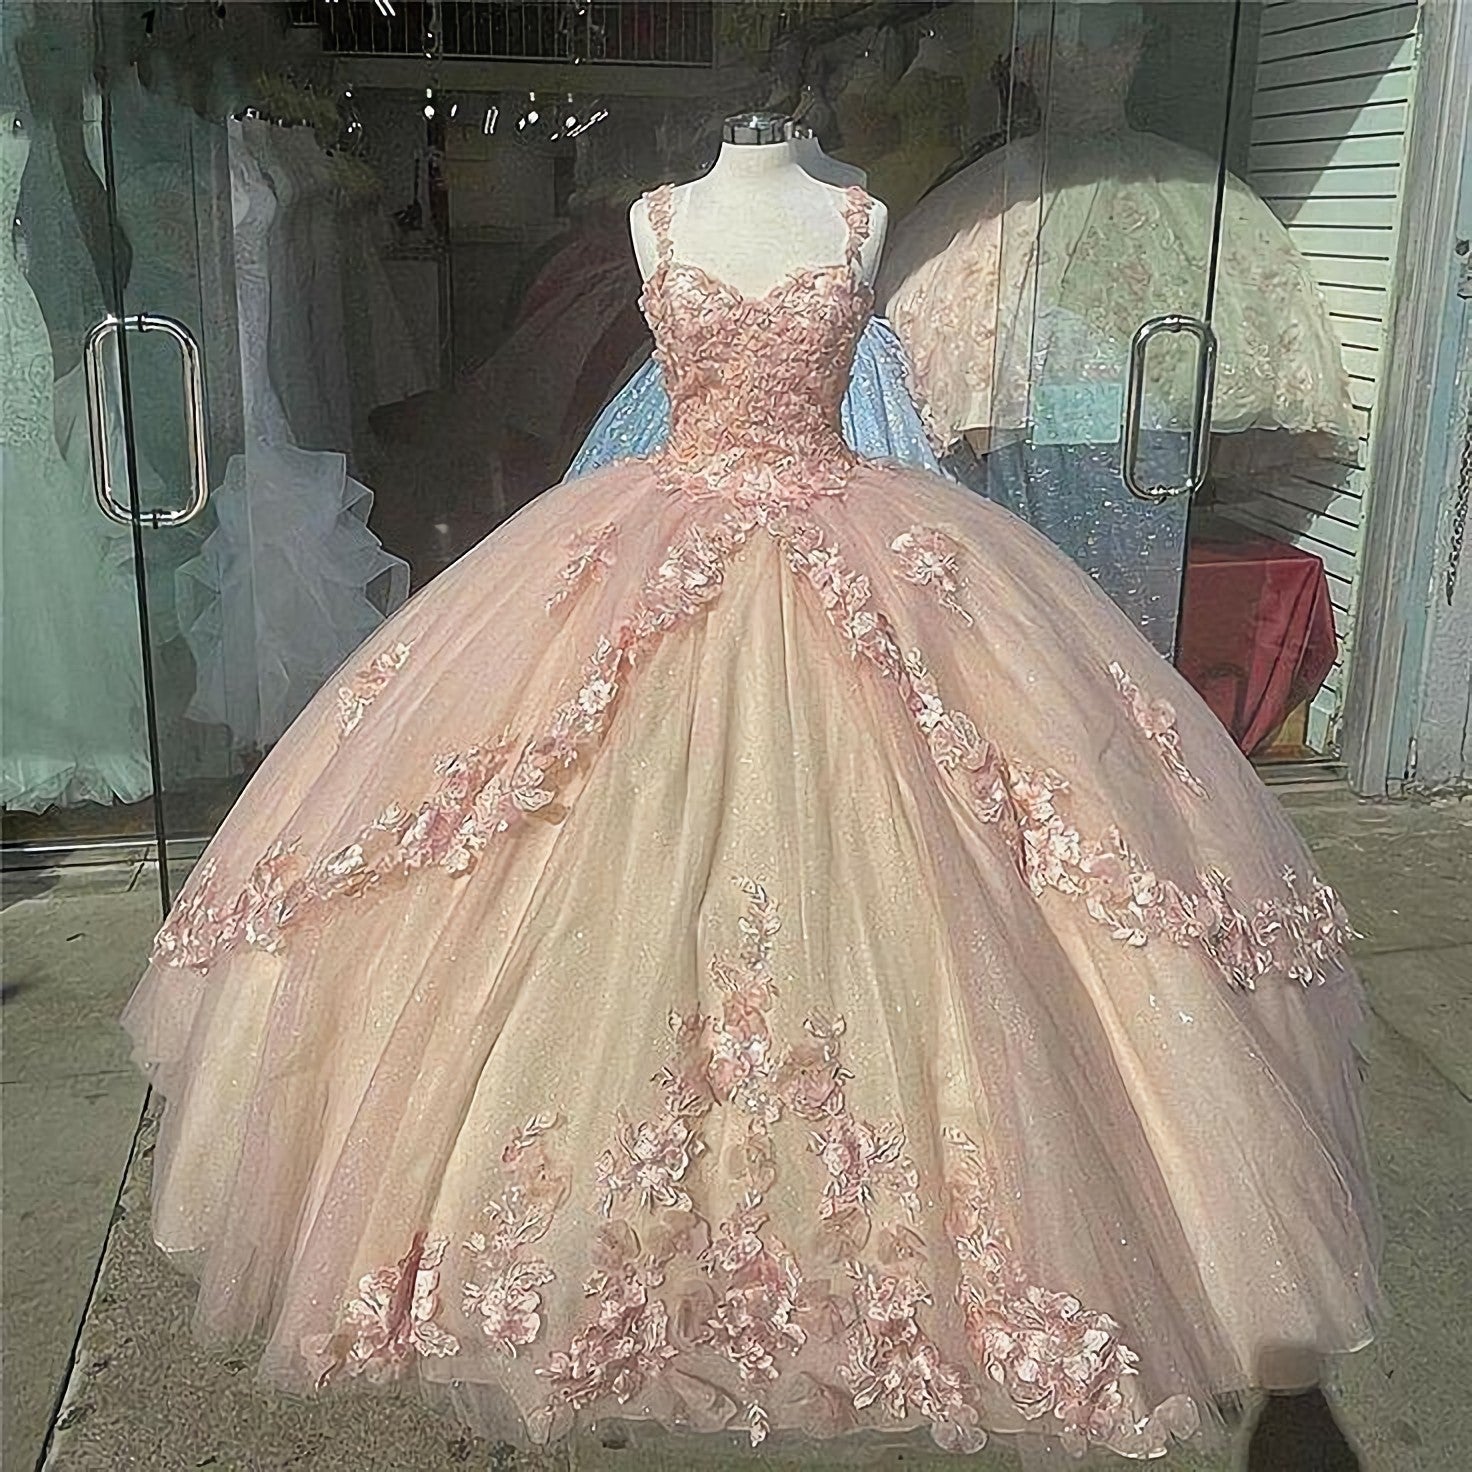 Party Dress Vintage, Pink Sparkly Quinceanera Prom Dresses, Lace Flower Sweet 16 Tulle Party Ball Gown